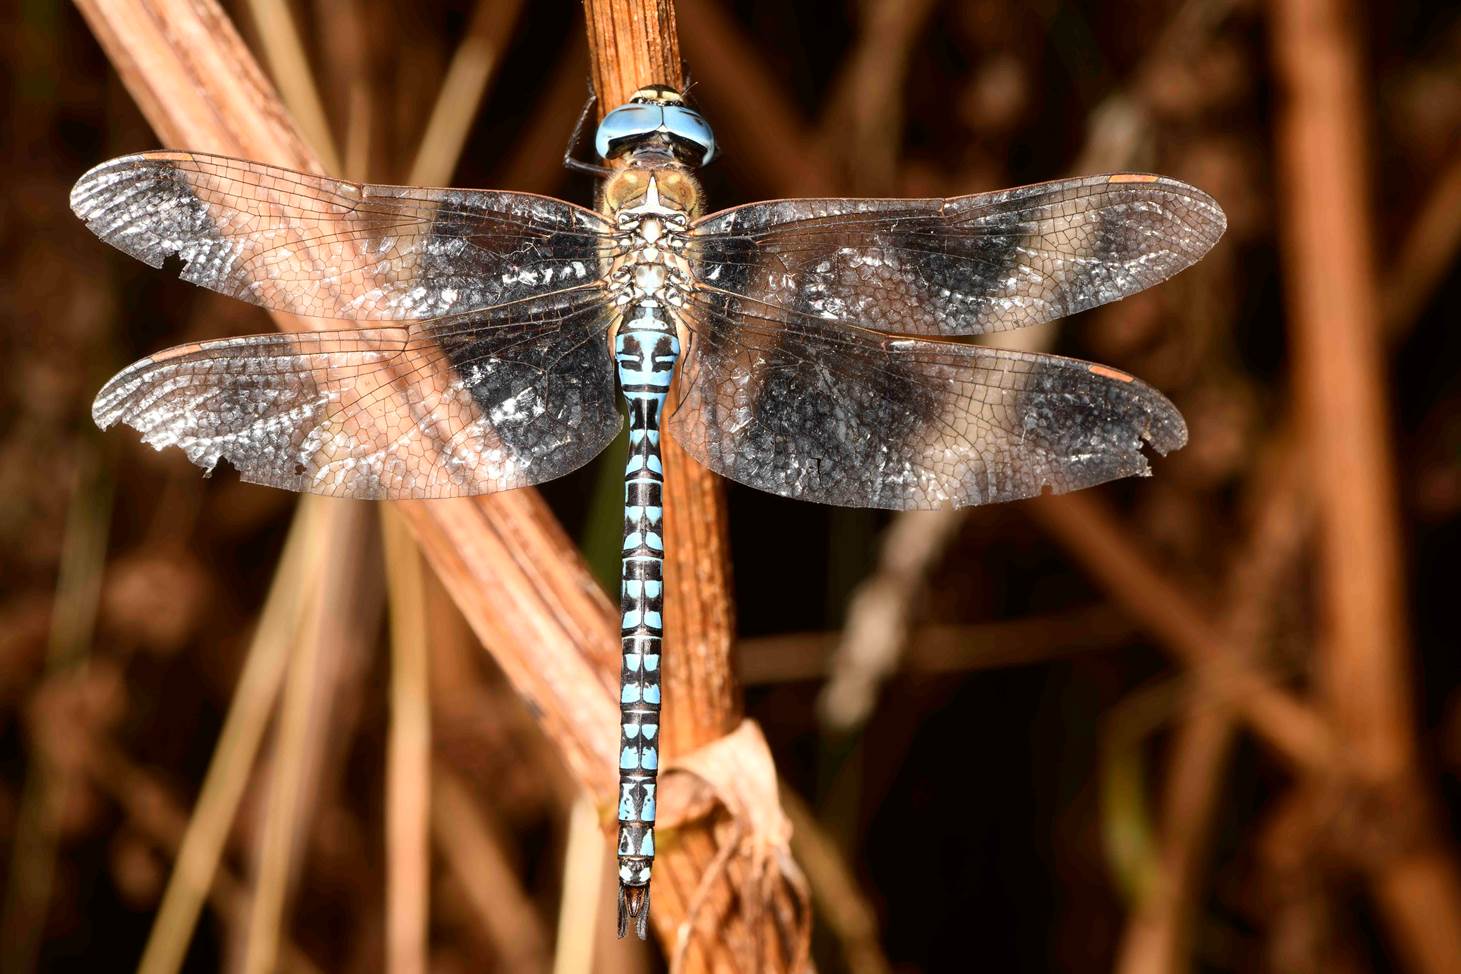 A dragonfly with wings on a stick

Description automatically generated